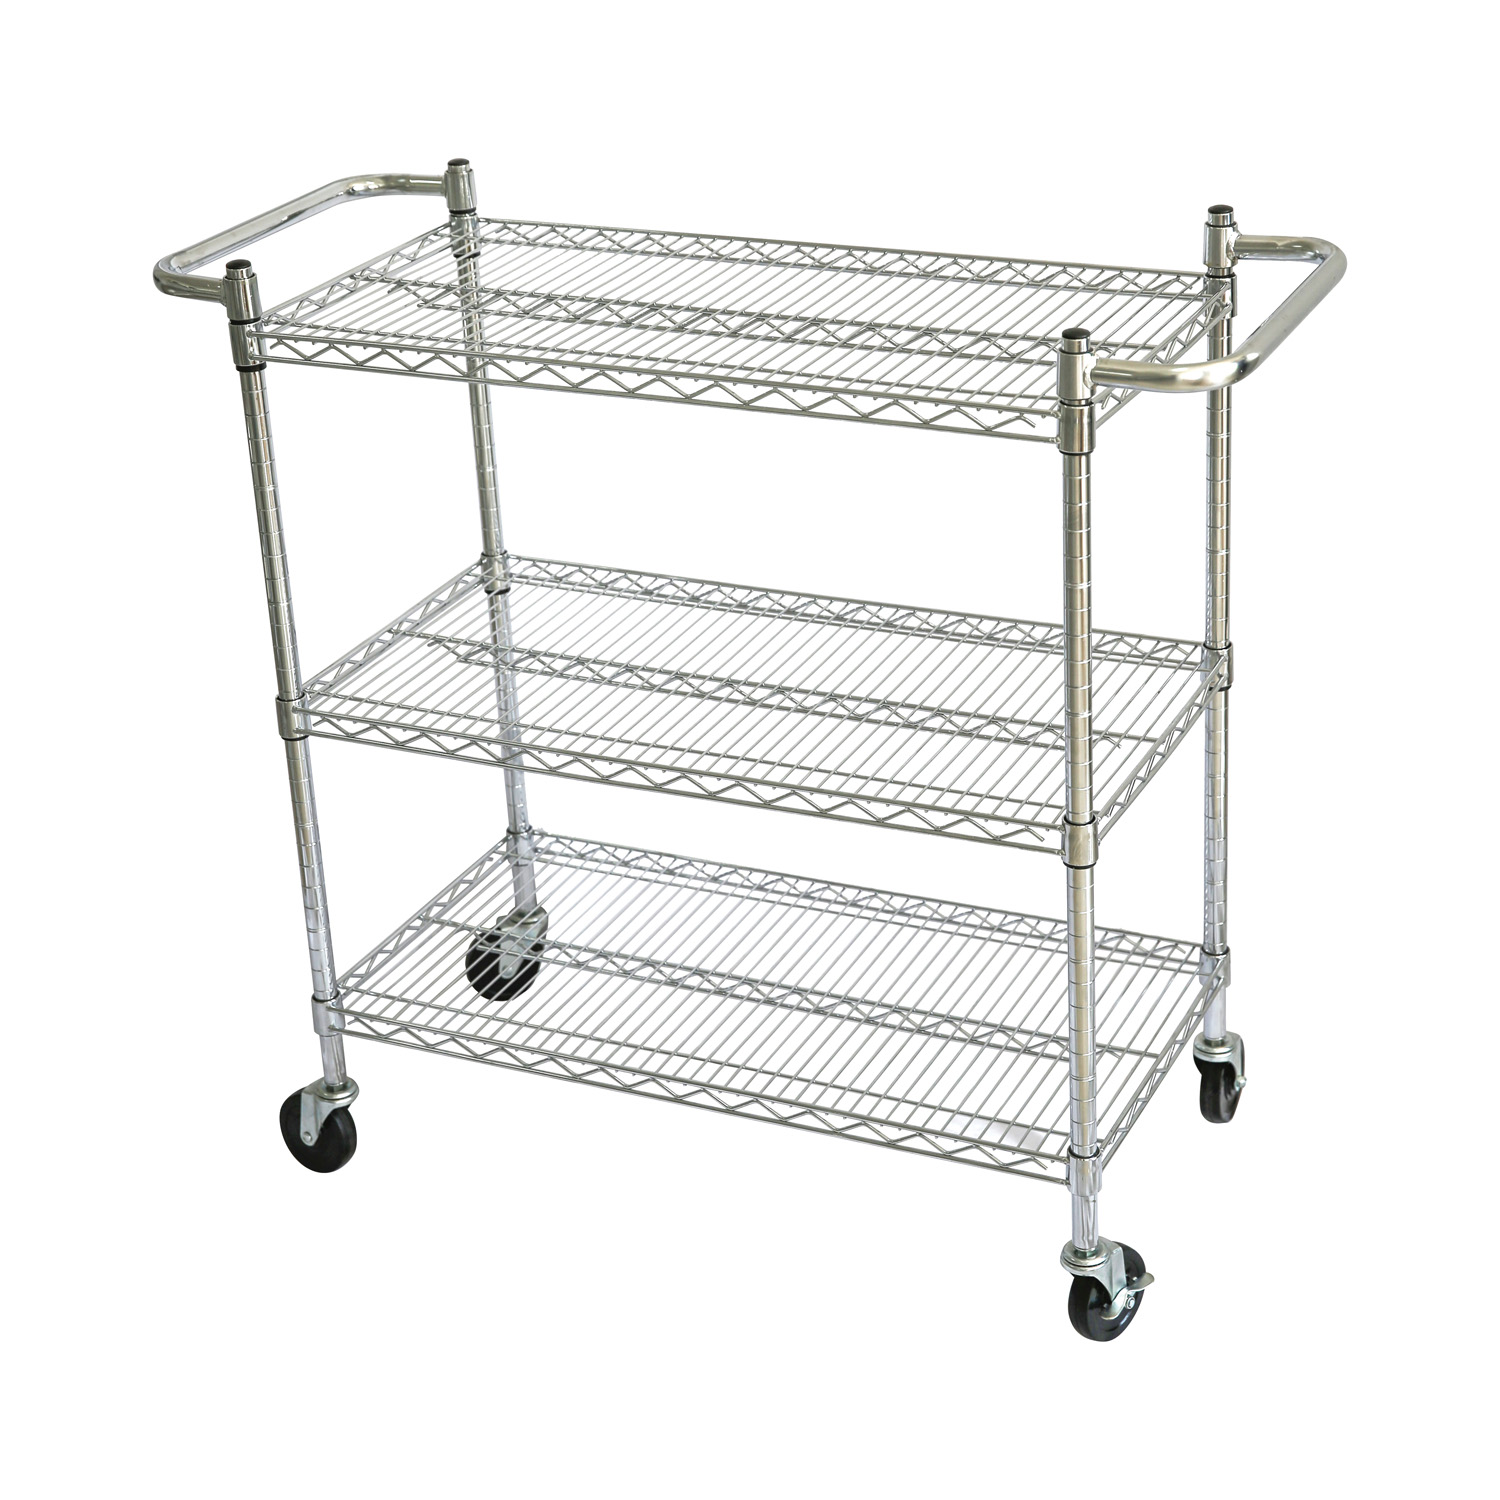 CAC China ACCW-2448S Chrome-Plated 3-Tier Wire Utility Cart 1 24" x 48" x 42" H